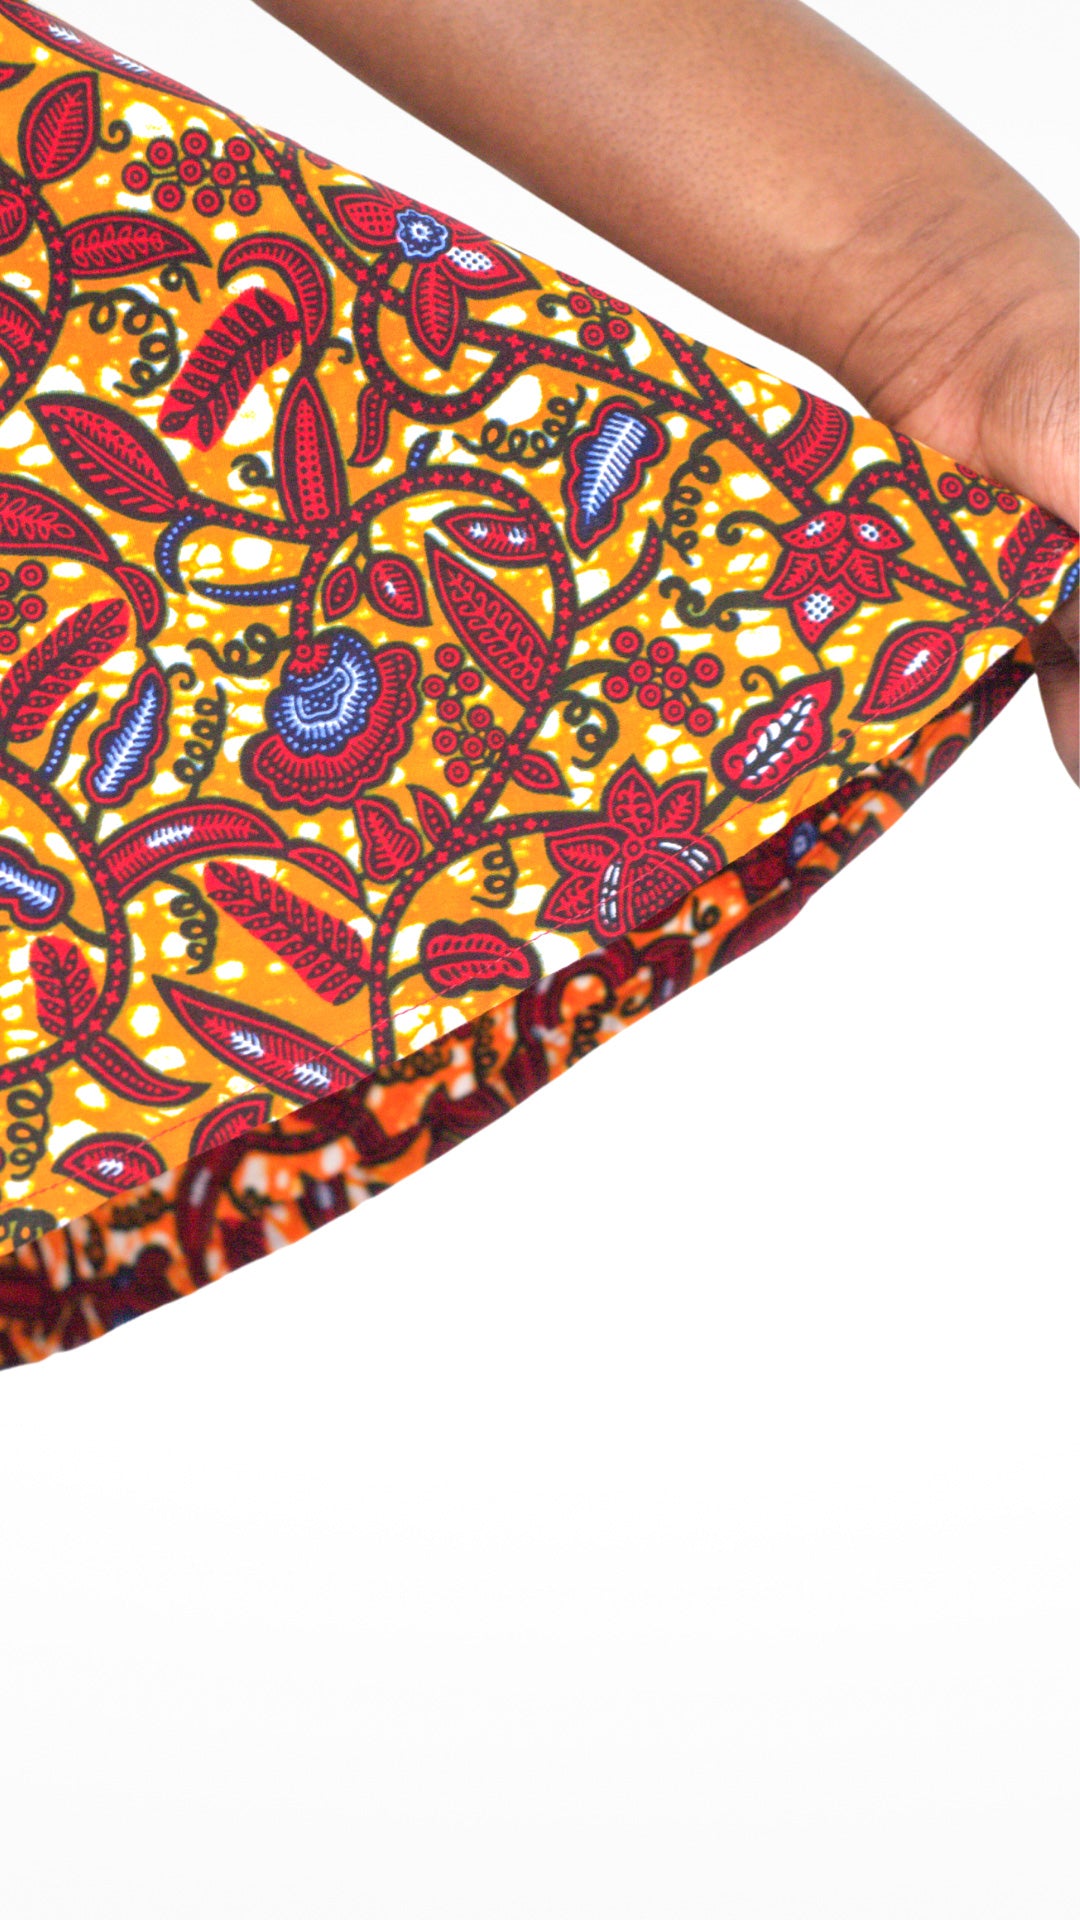 A close up of the red floral elements of the orange print dress showing the high quality of the fabric.